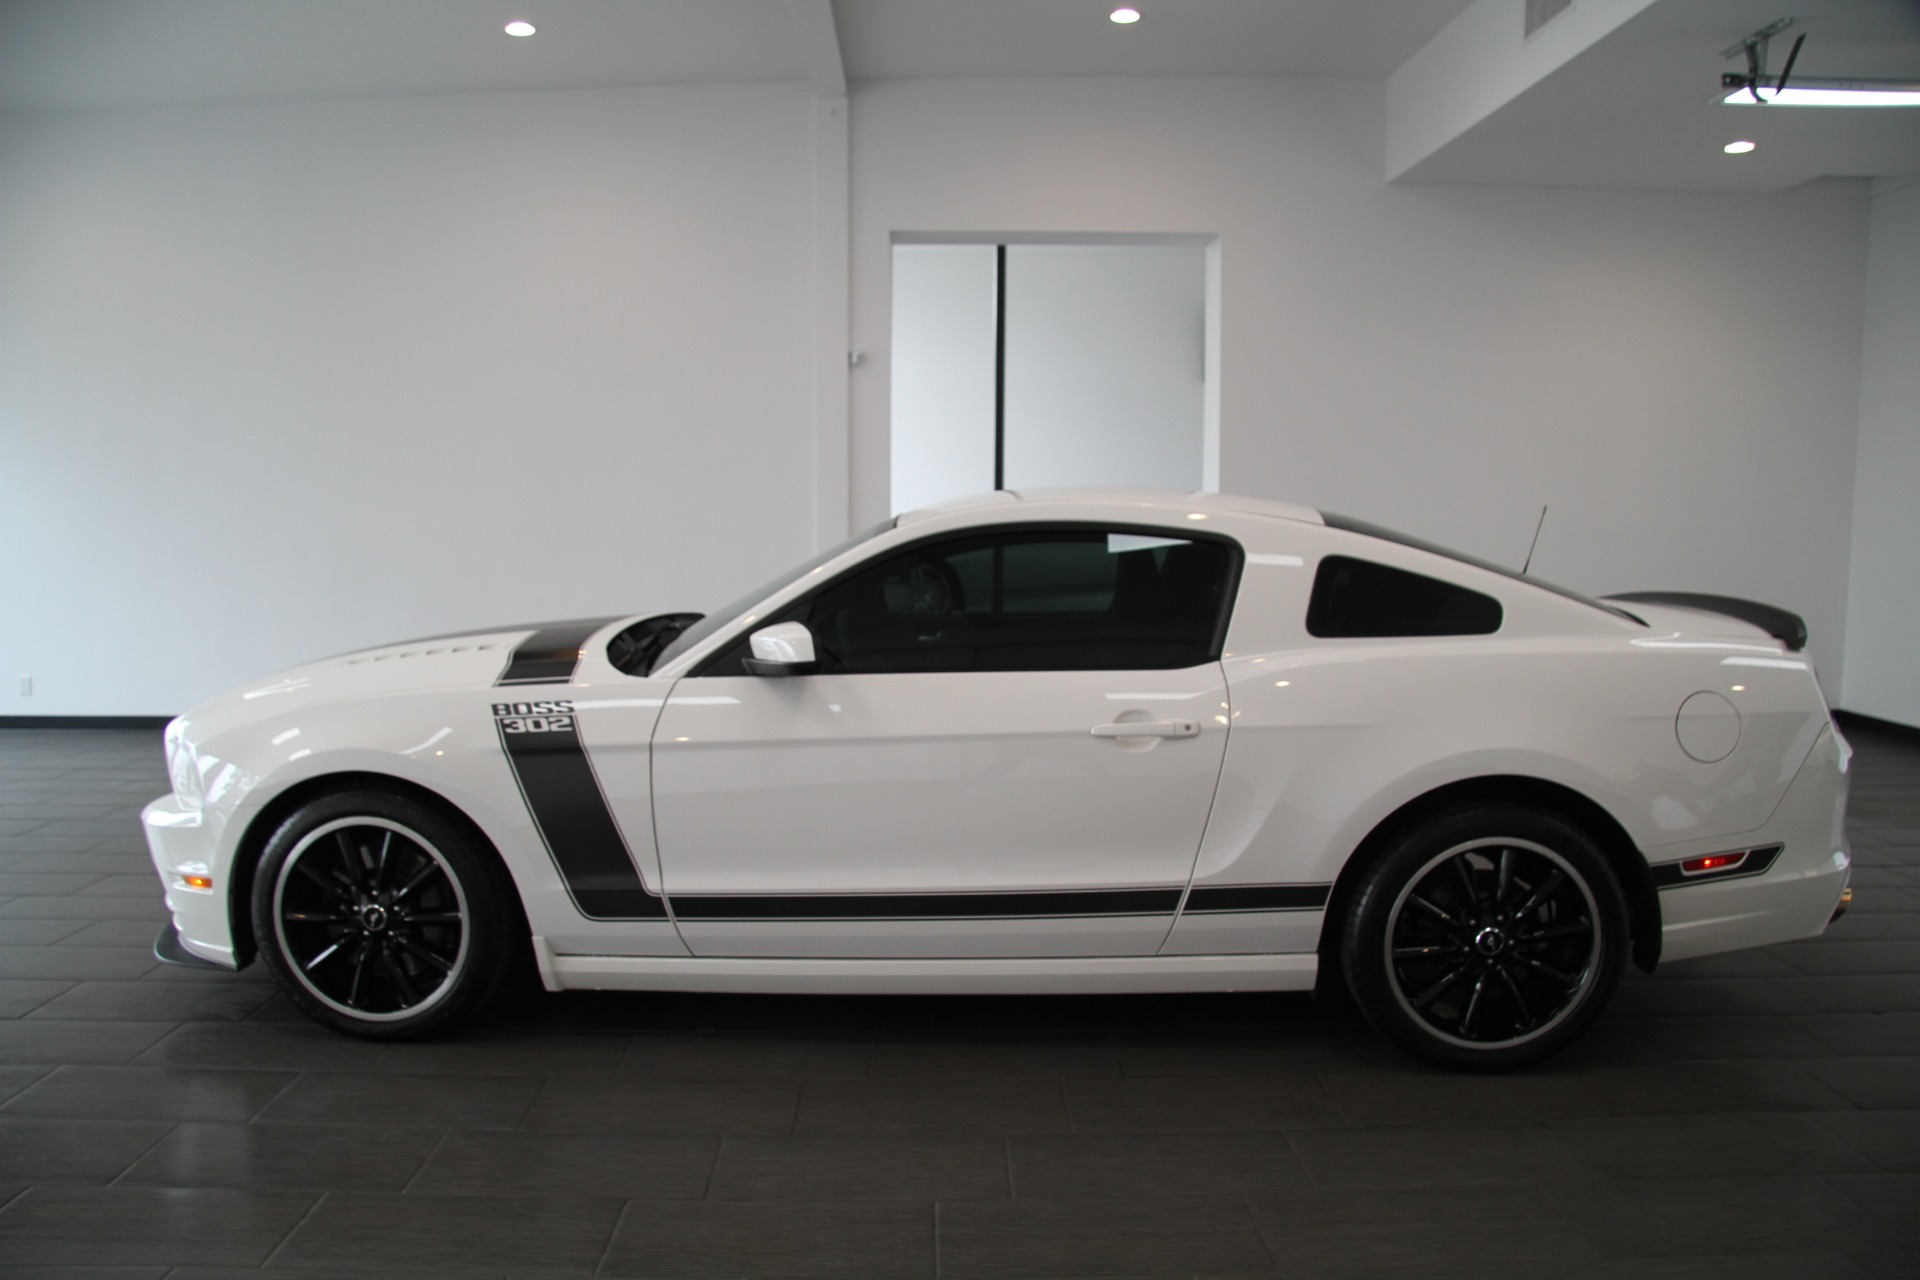 2013 Ford Mustang Boss 302 Stock # 267204 for sale near Redondo Beach